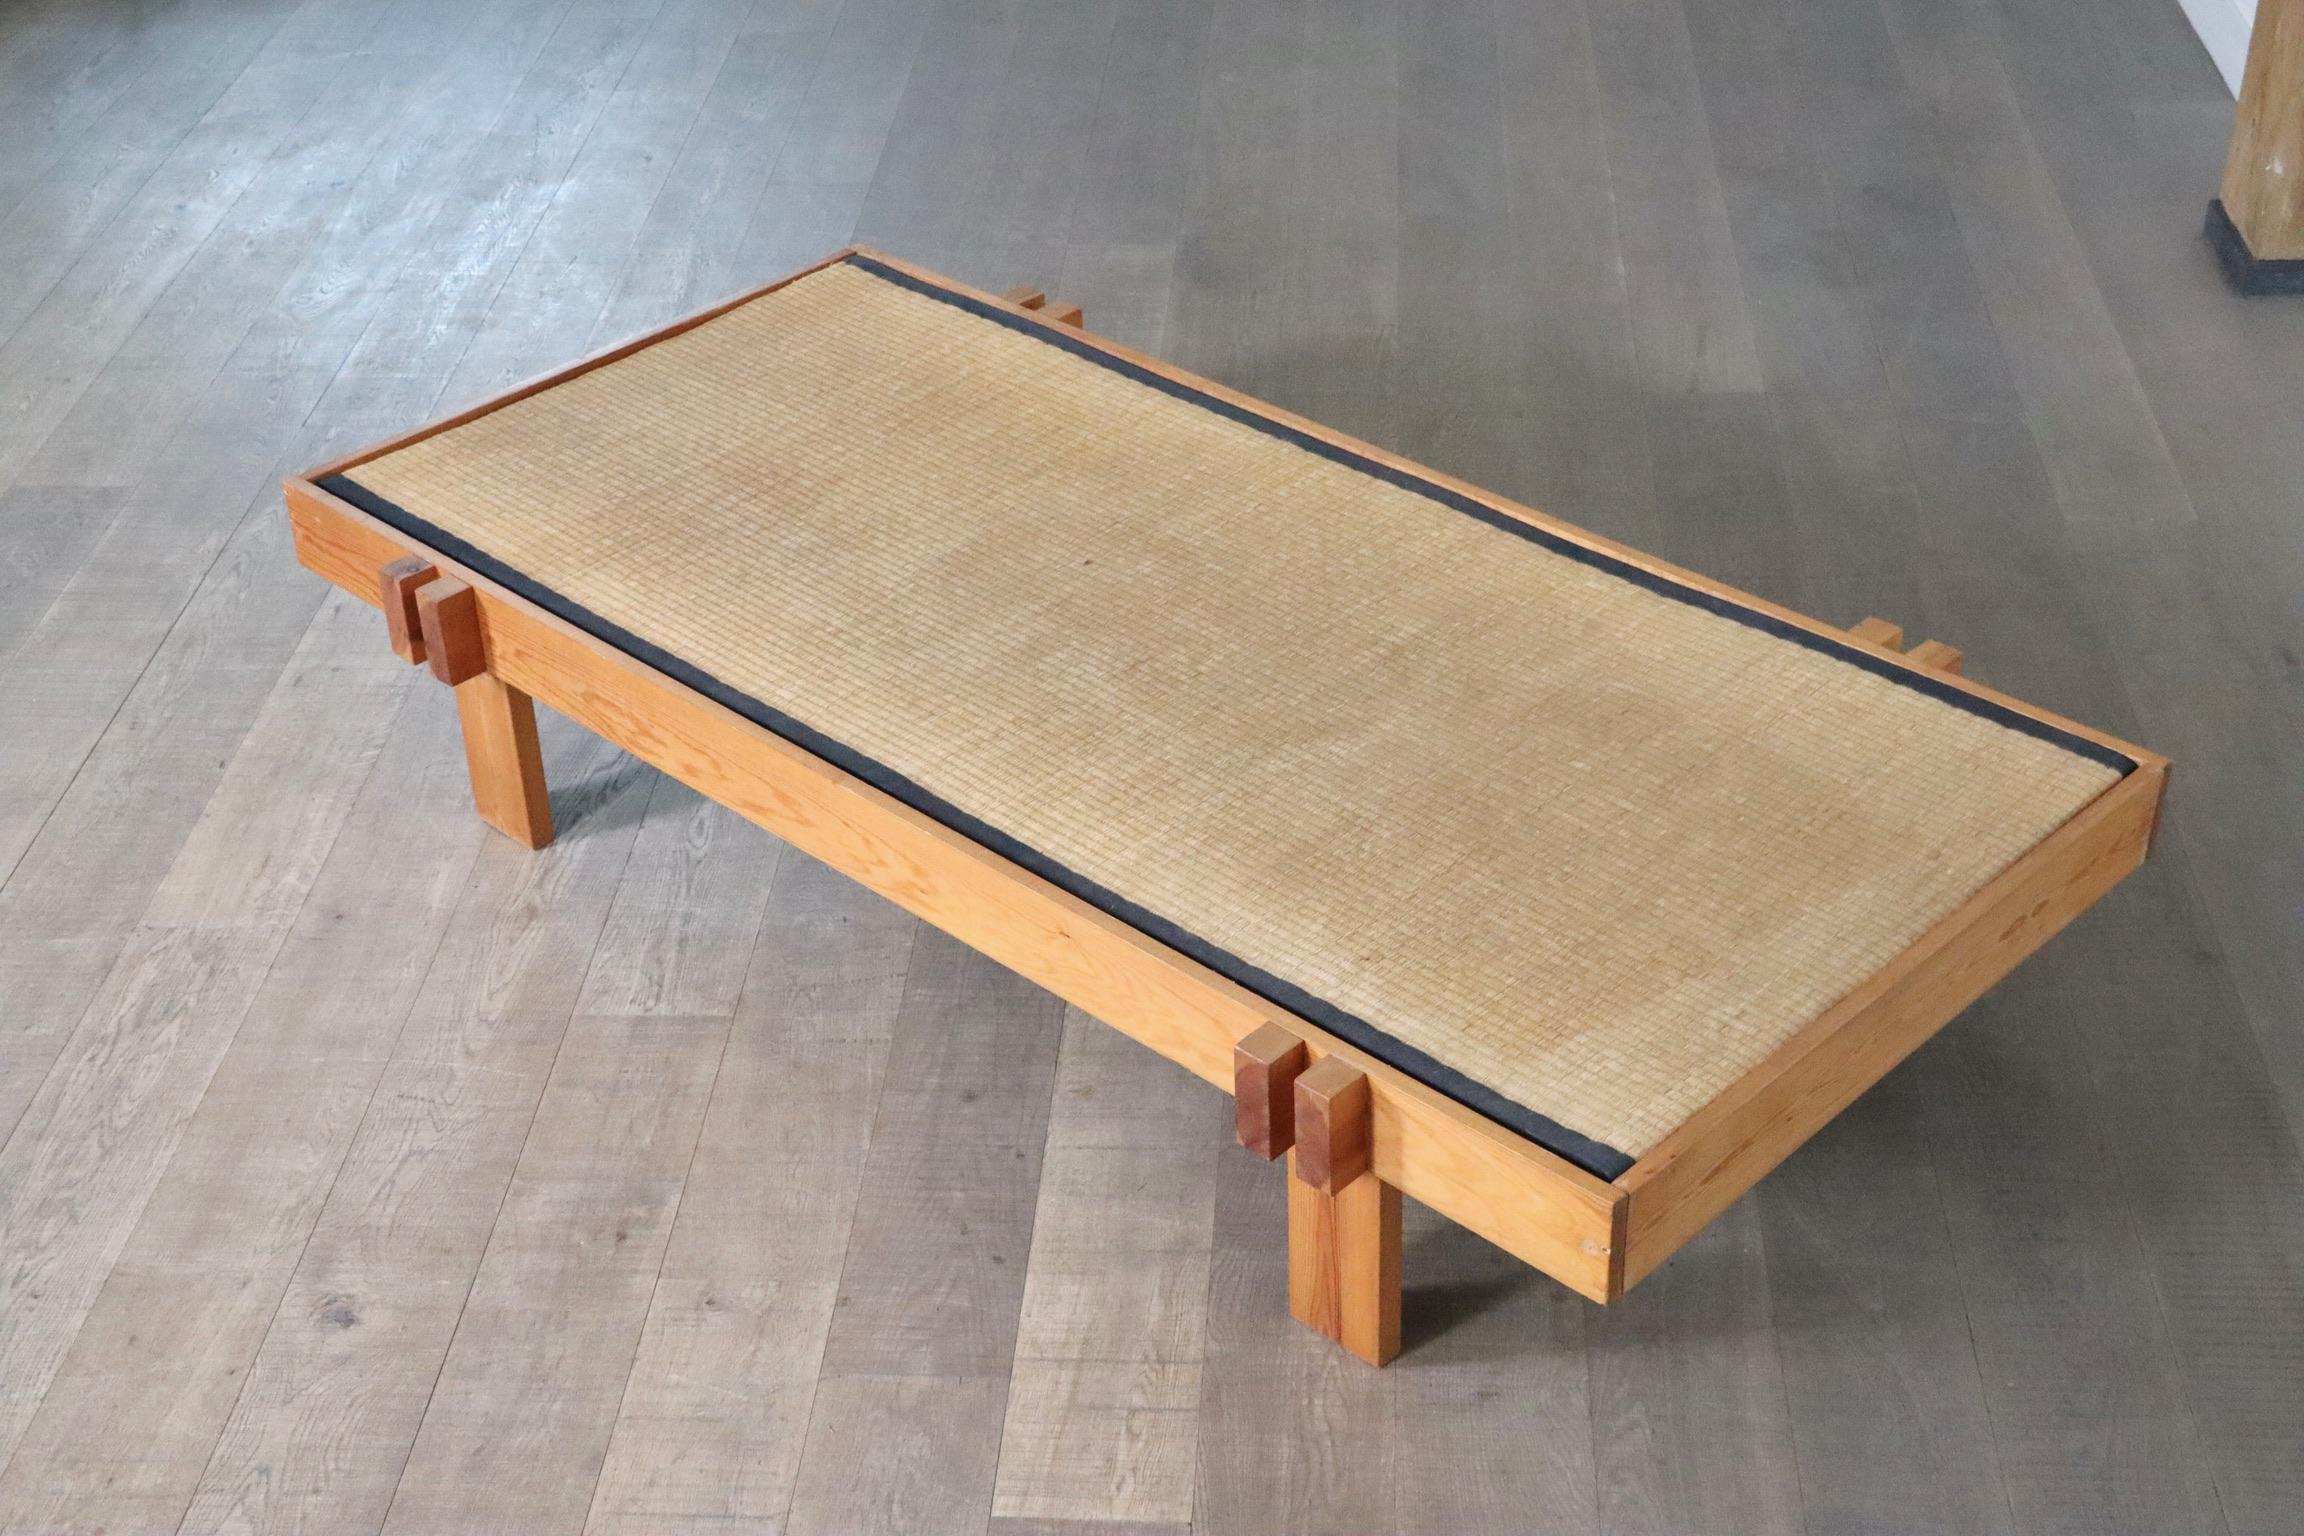 Beautiful Japanese coffee table made of wood and seagrass, Japan 1960s. A nice example of a minimalistic coffee table which brings harmony in a busy life. A nice large table top made of a thick seagrass inlay resting in the wooden frame. With the